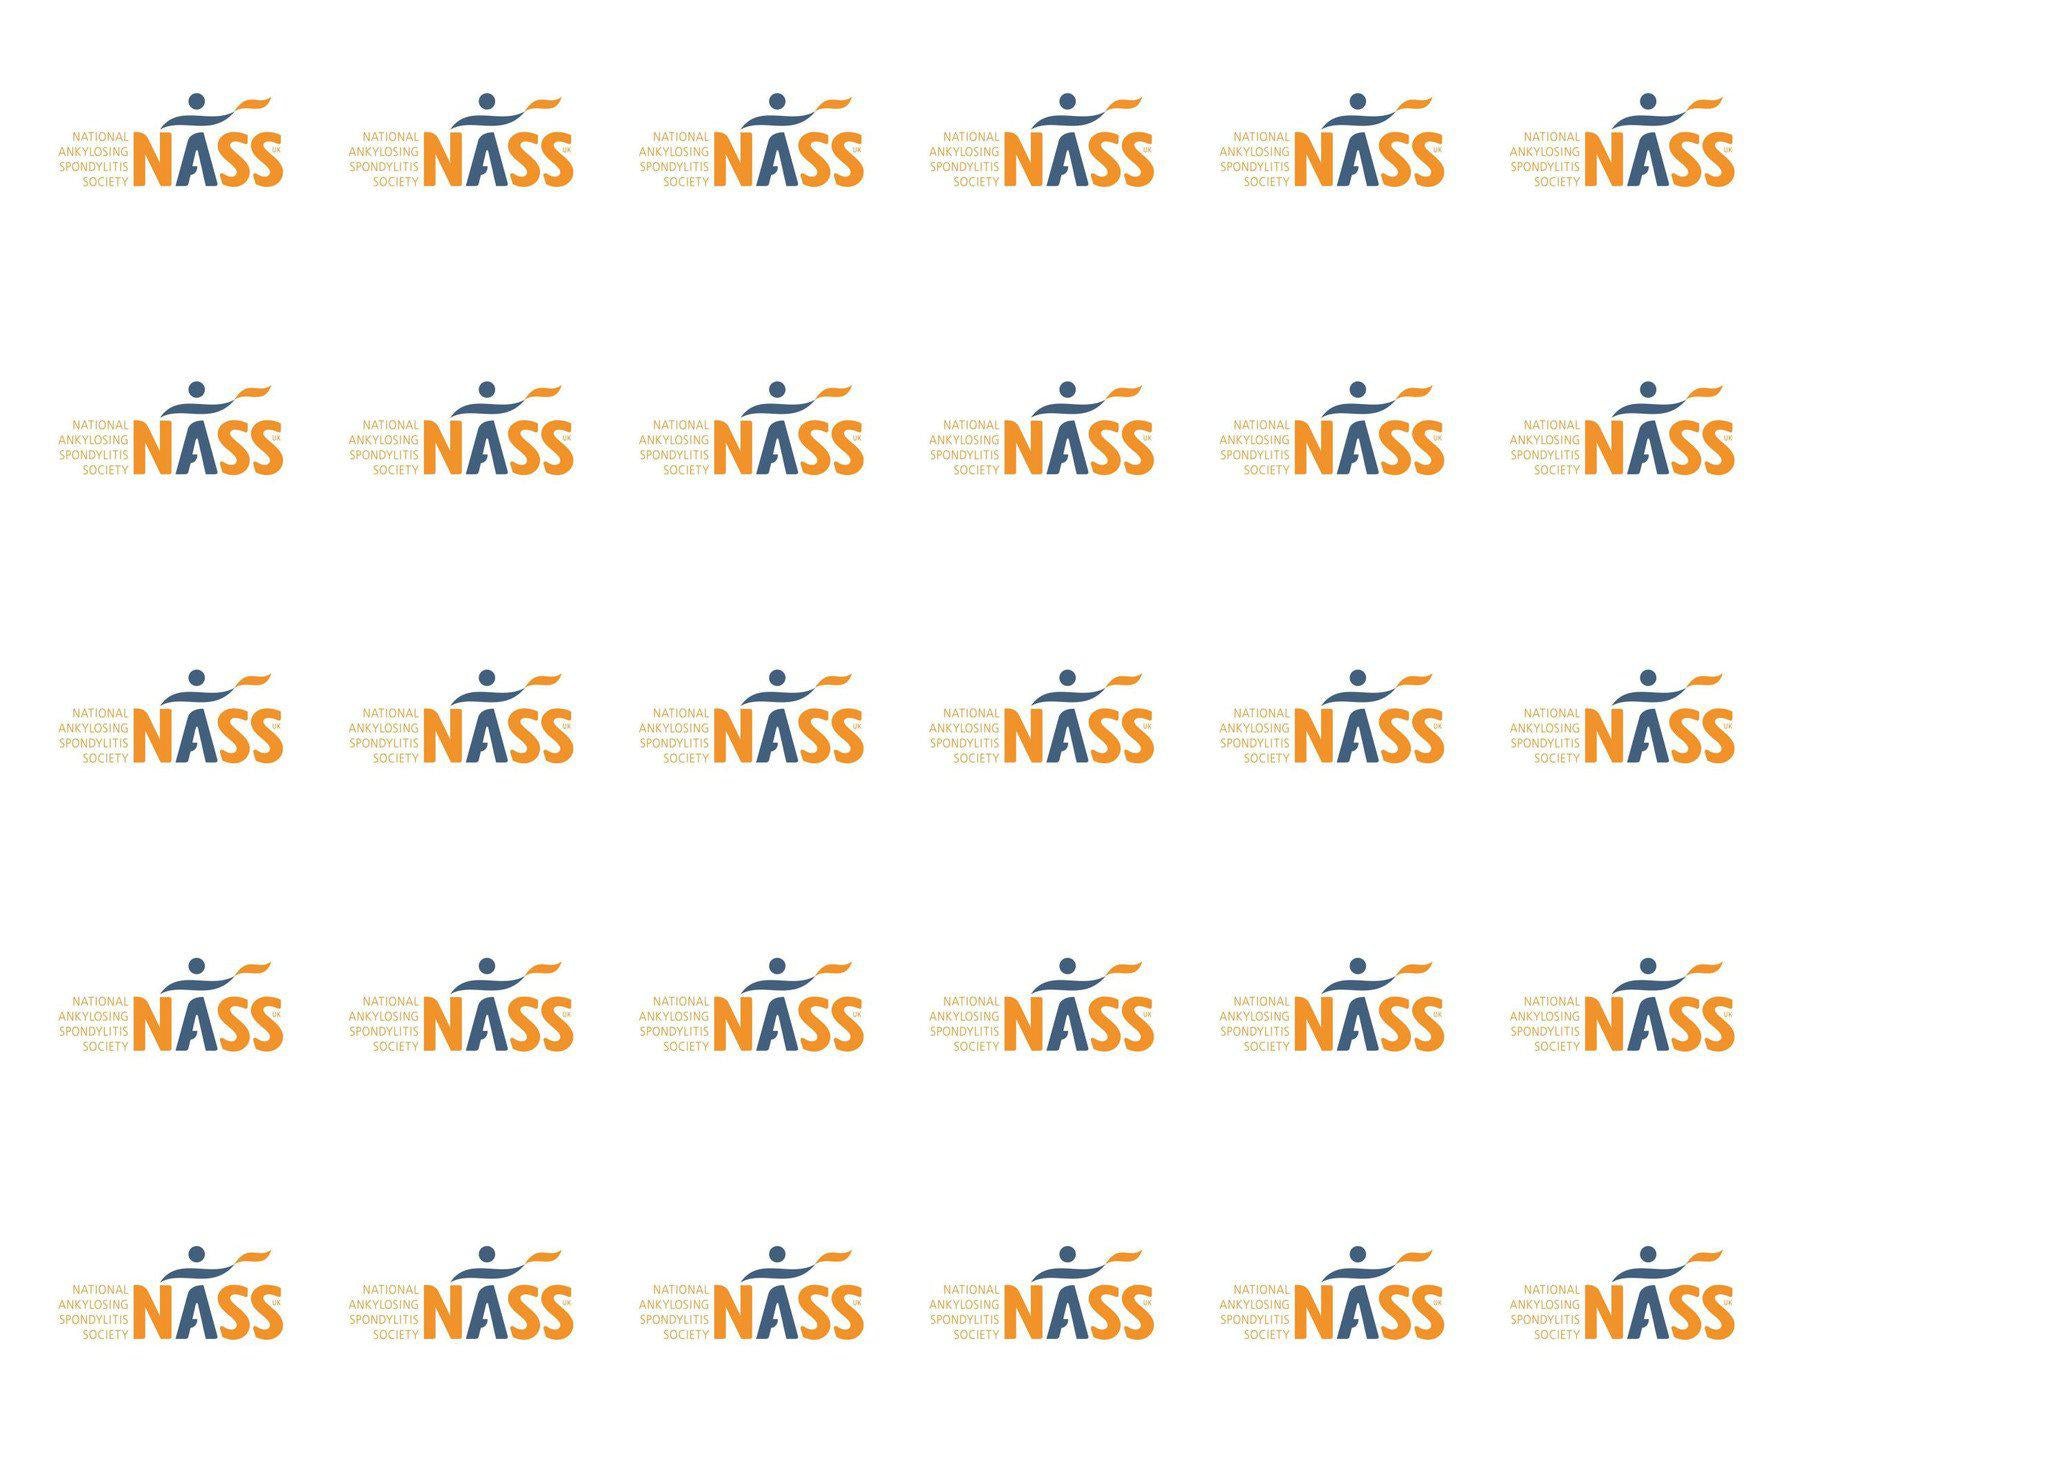 Edible cupcake toppers with the NASS logo